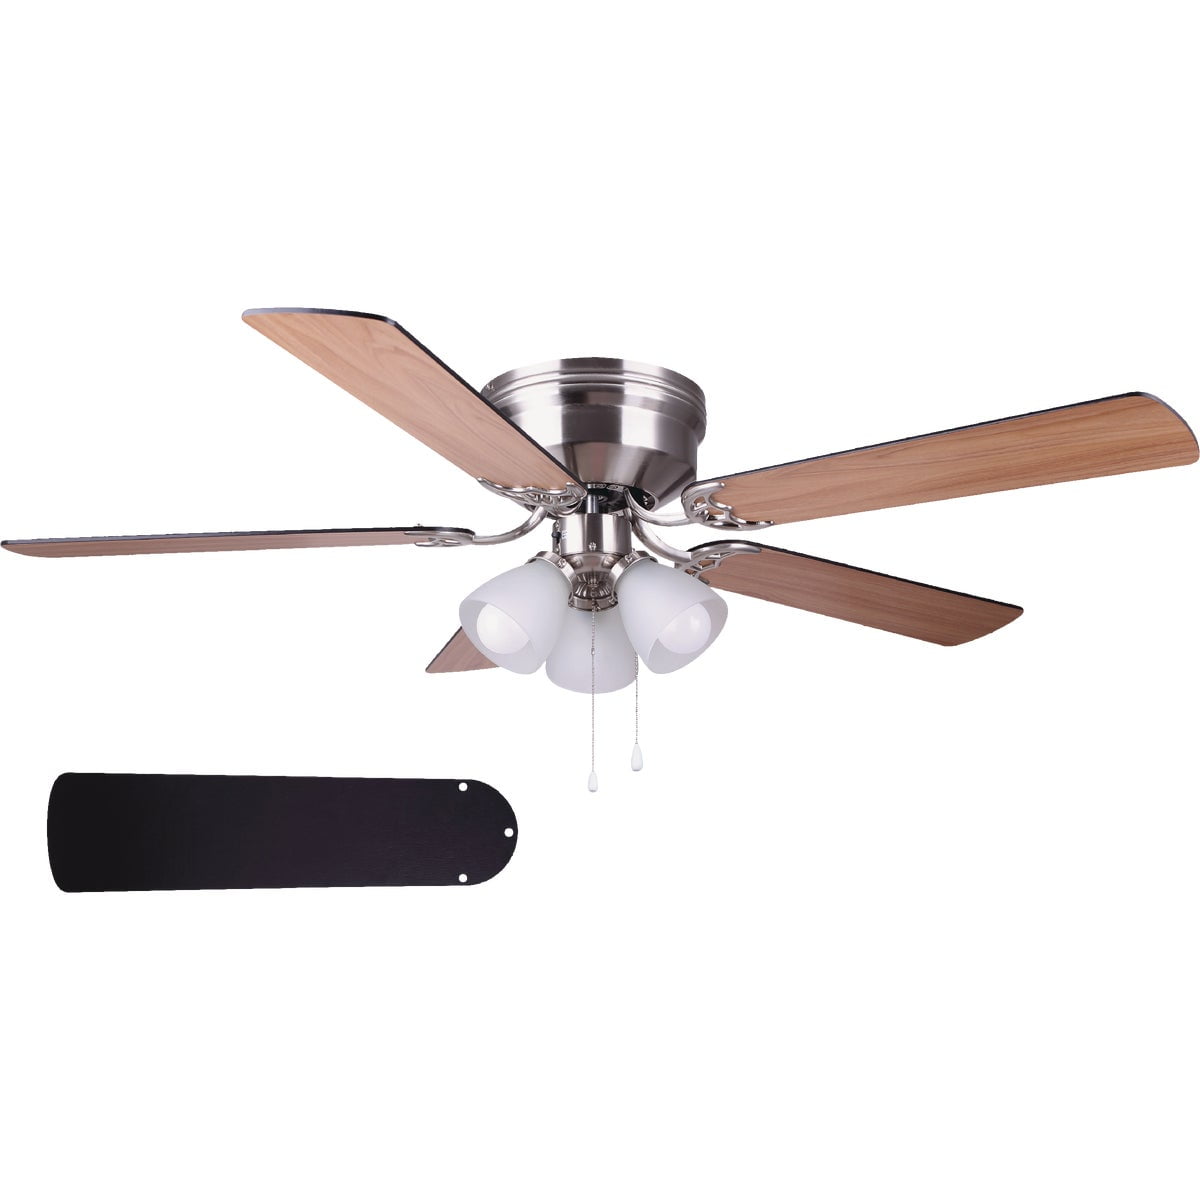 Red Accent 52 in Retro Ceiling Fan Nickel Light Kit Home Office Hallway Lighting 